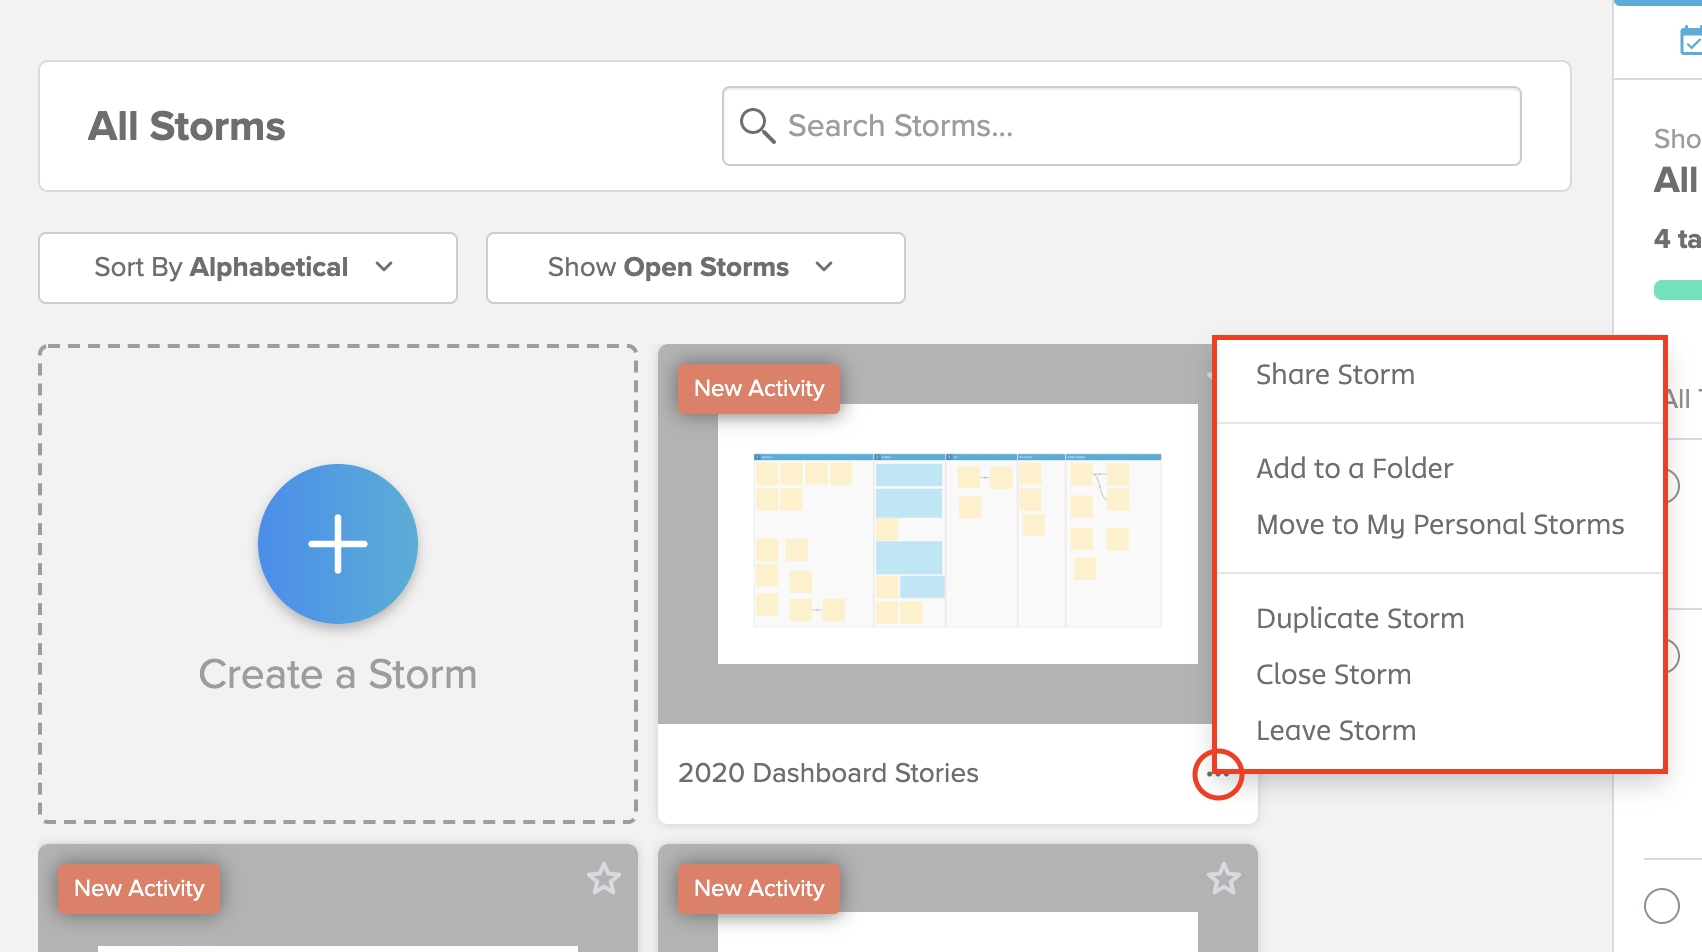 Stormboard menu for individual Storms and workspaces